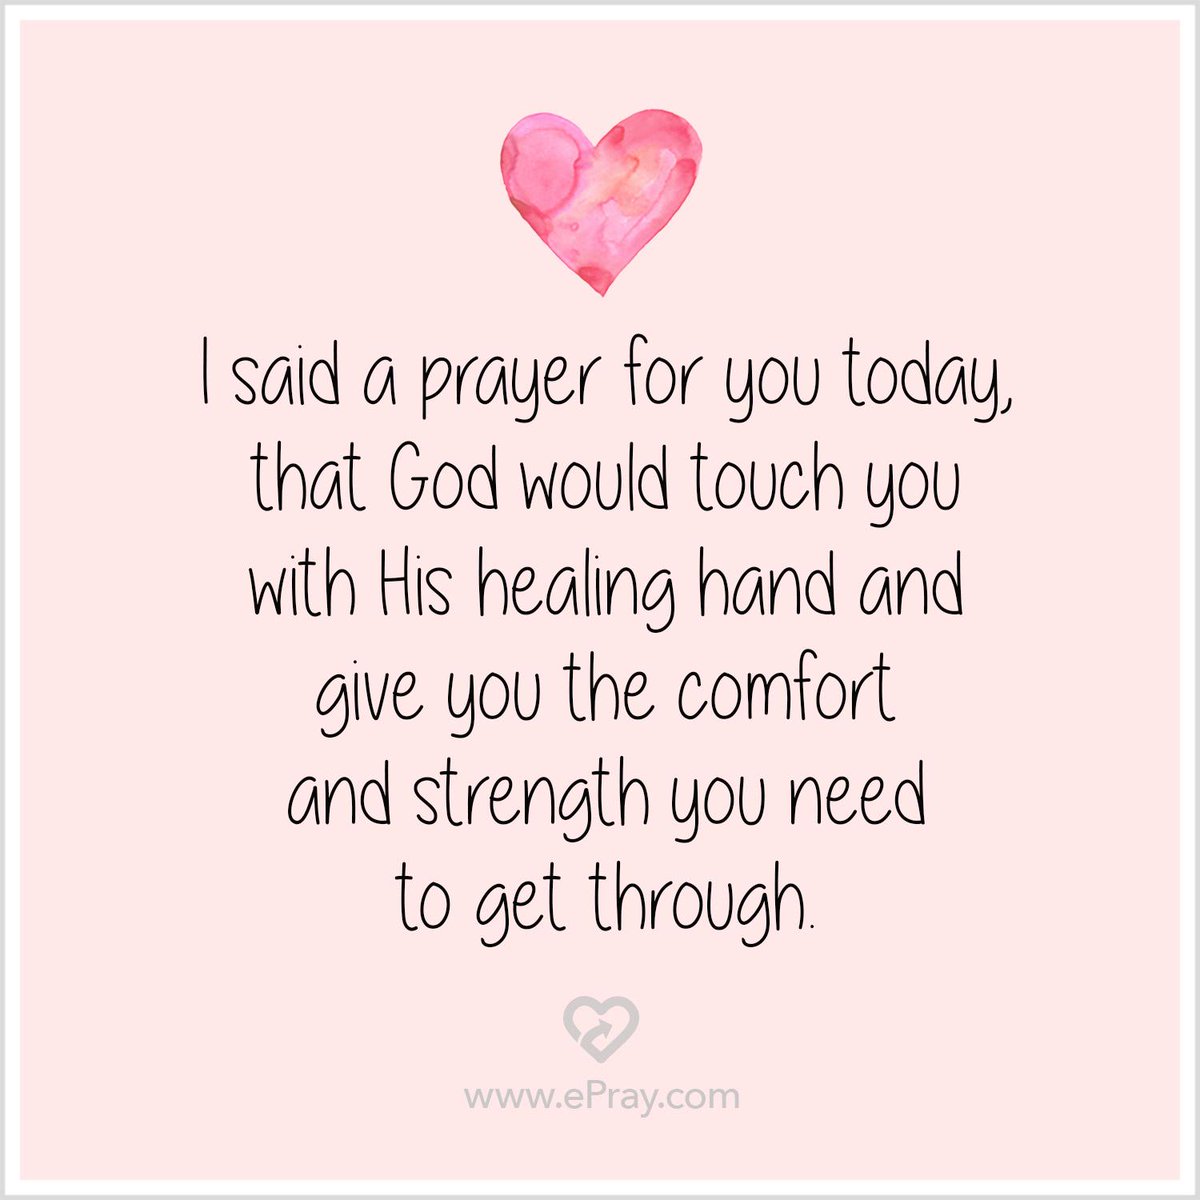 EPray Cancer on Twitter: "Say a prayer & share w your 